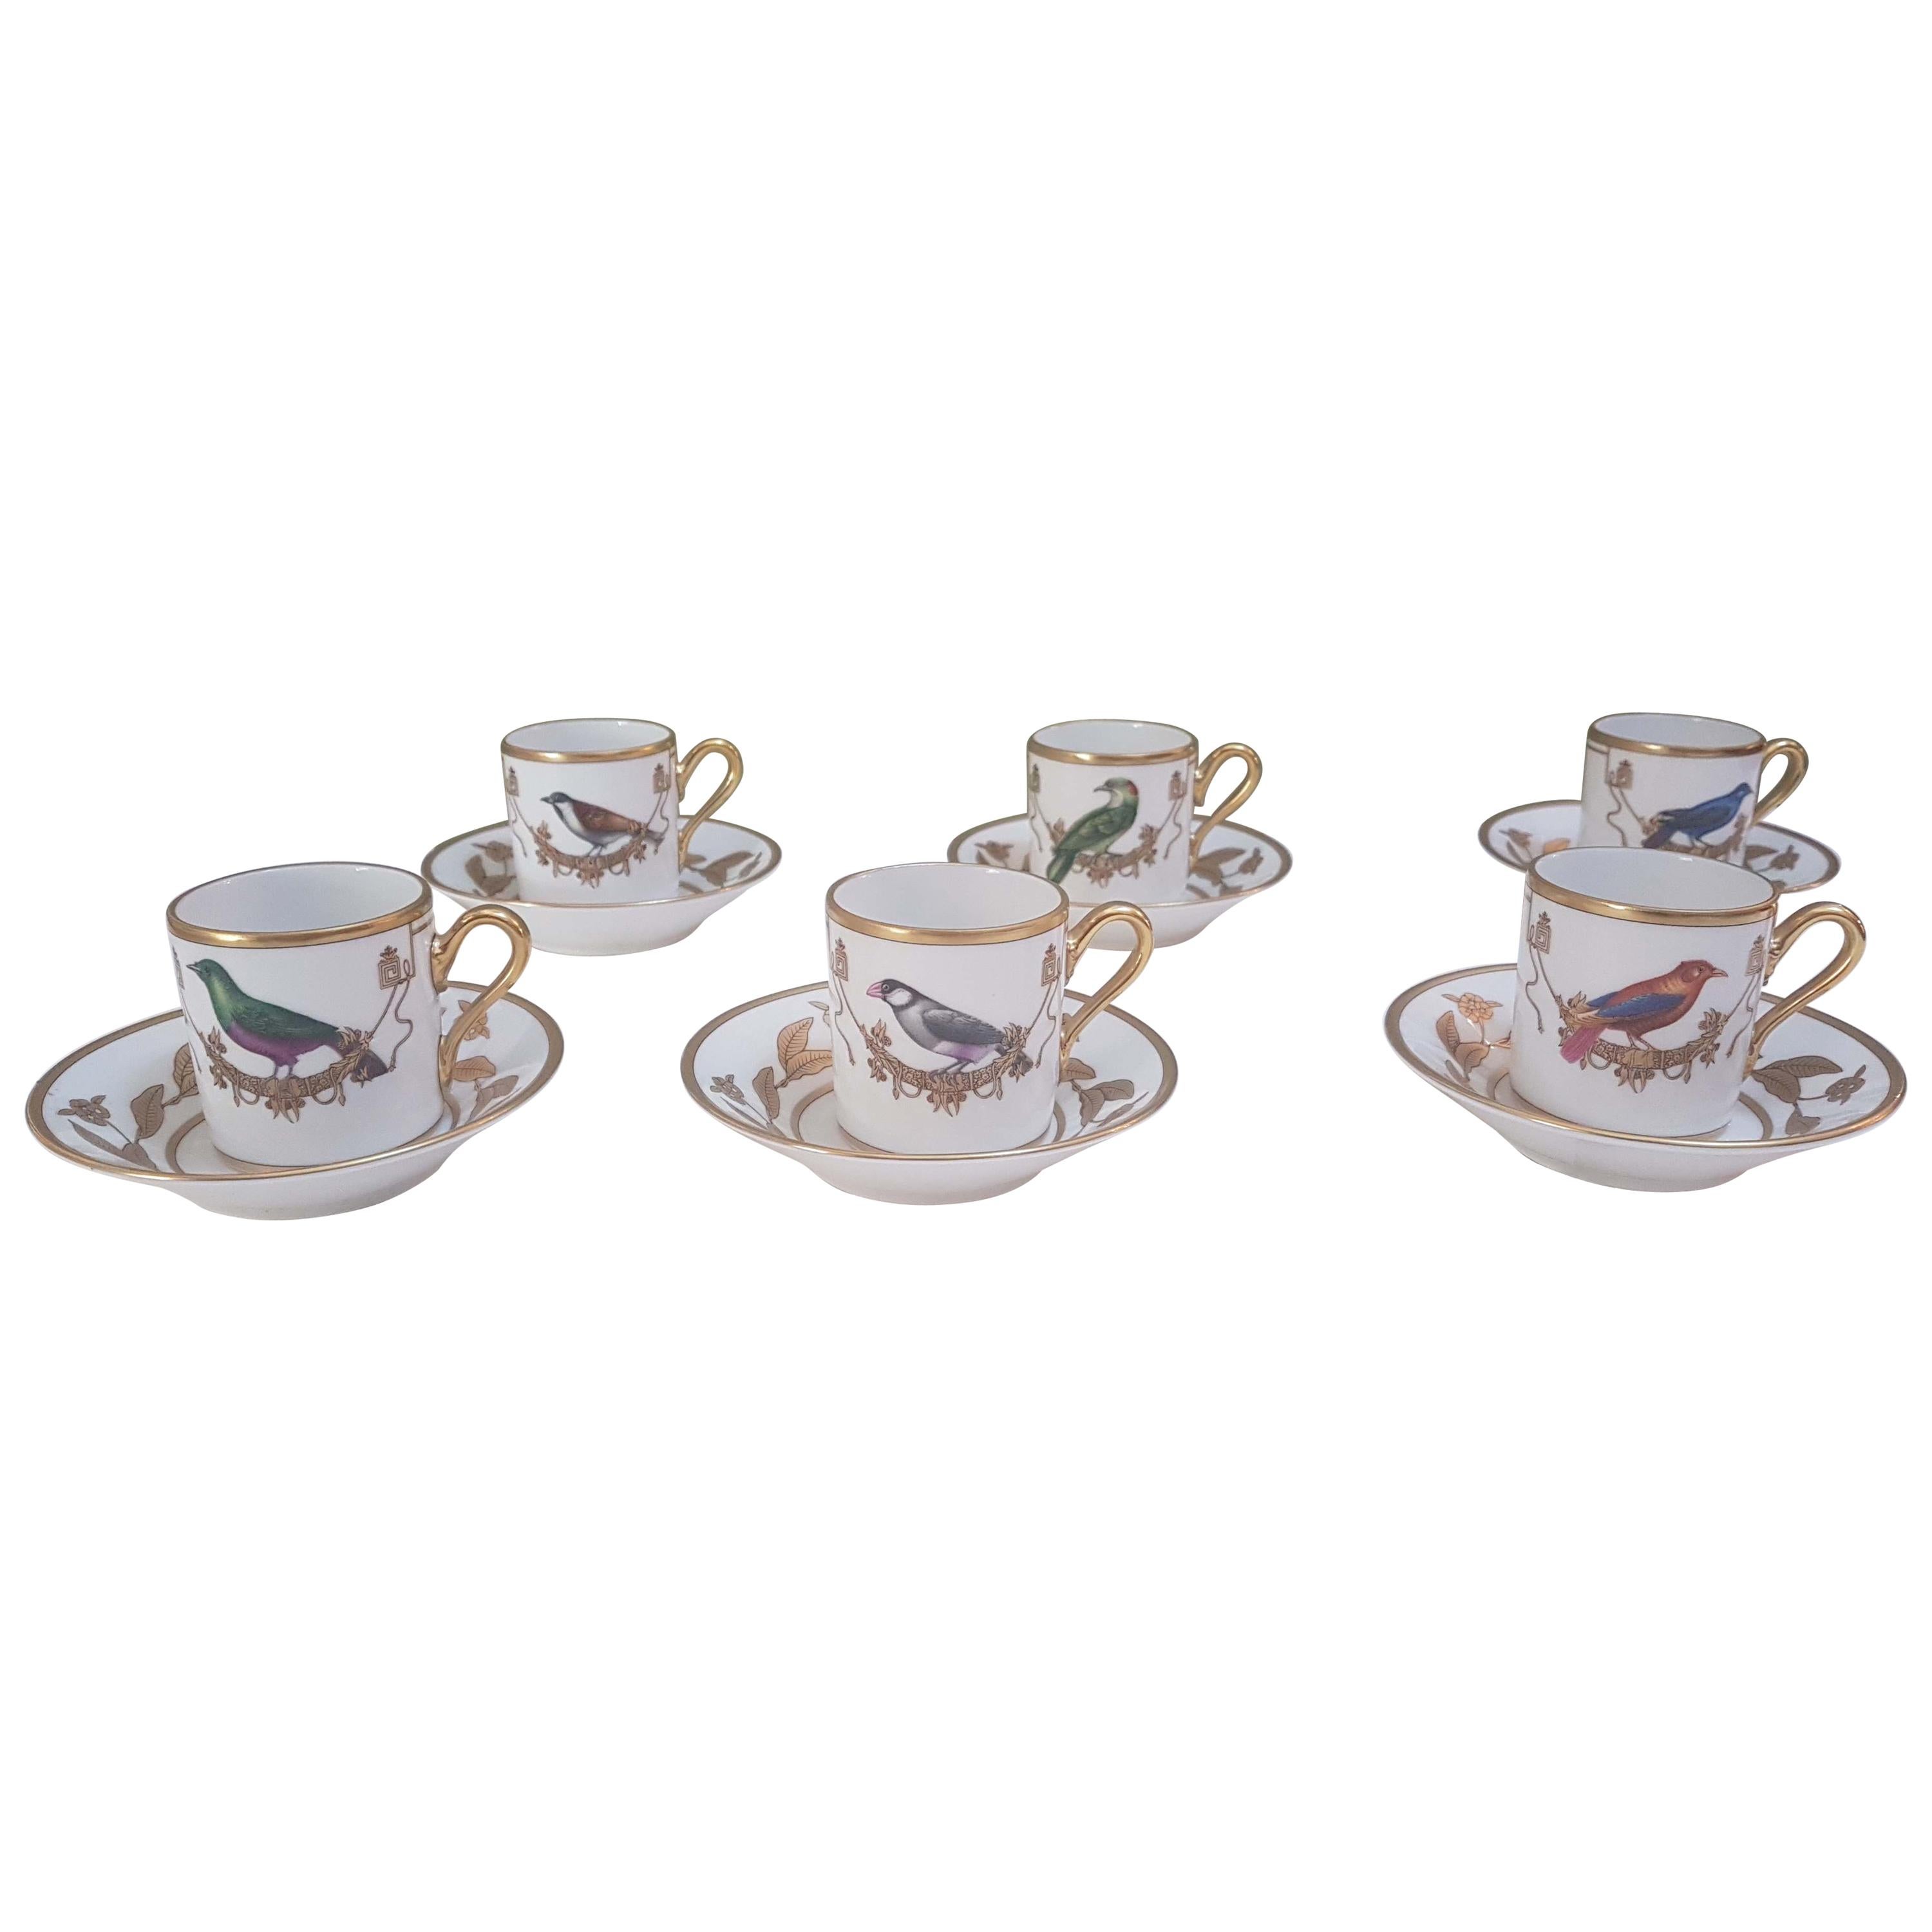 Richard Ginori Porcelain "Voliere" Set of Six Coffee Cups, Italy, 2018